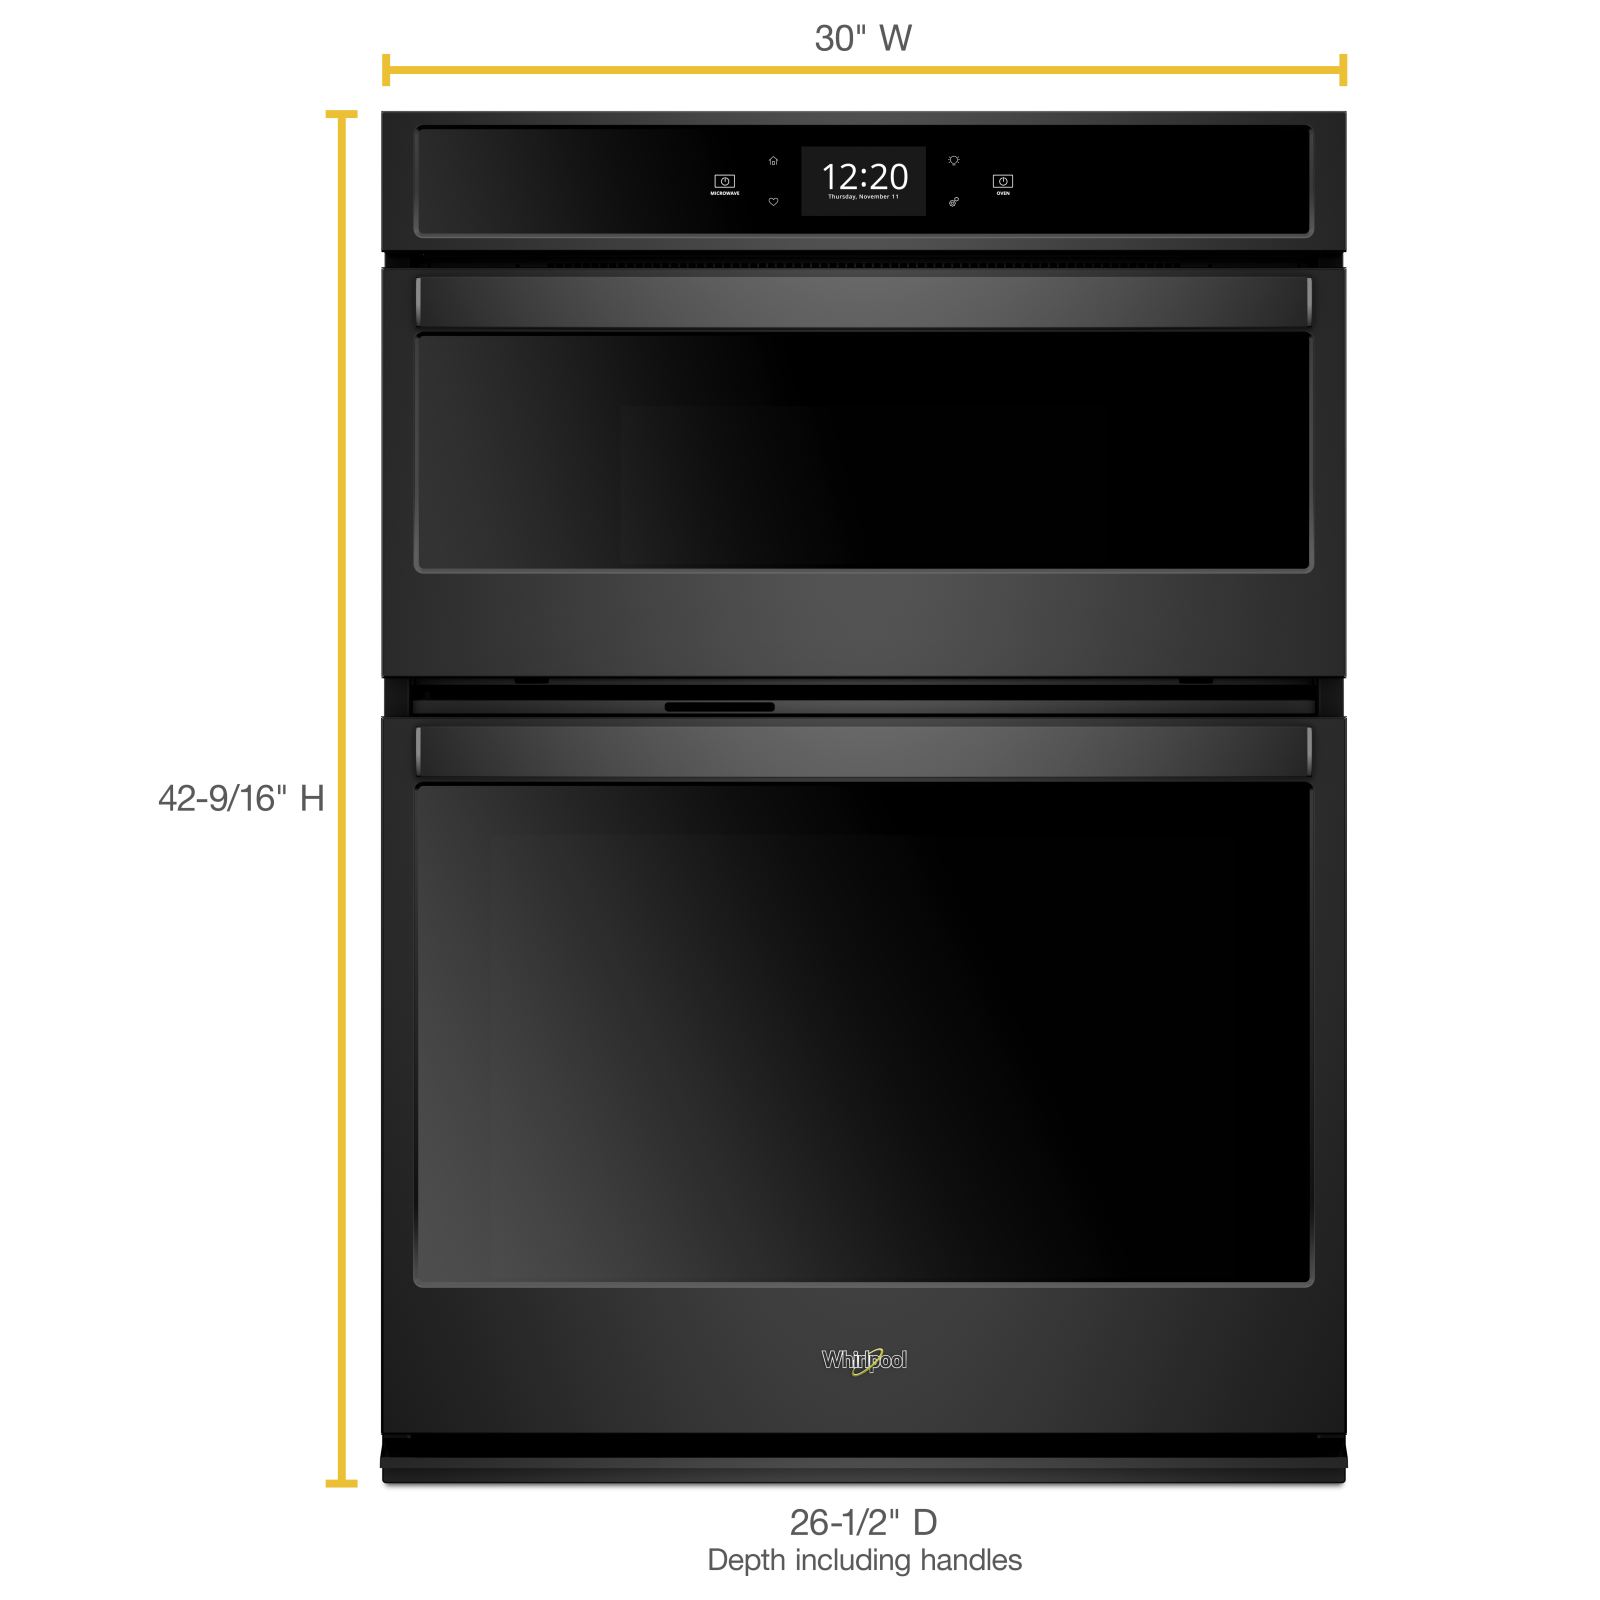 Whirlpool - 6.4 cu. ft Combination Wall Oven in Black - WOC75EC0HB